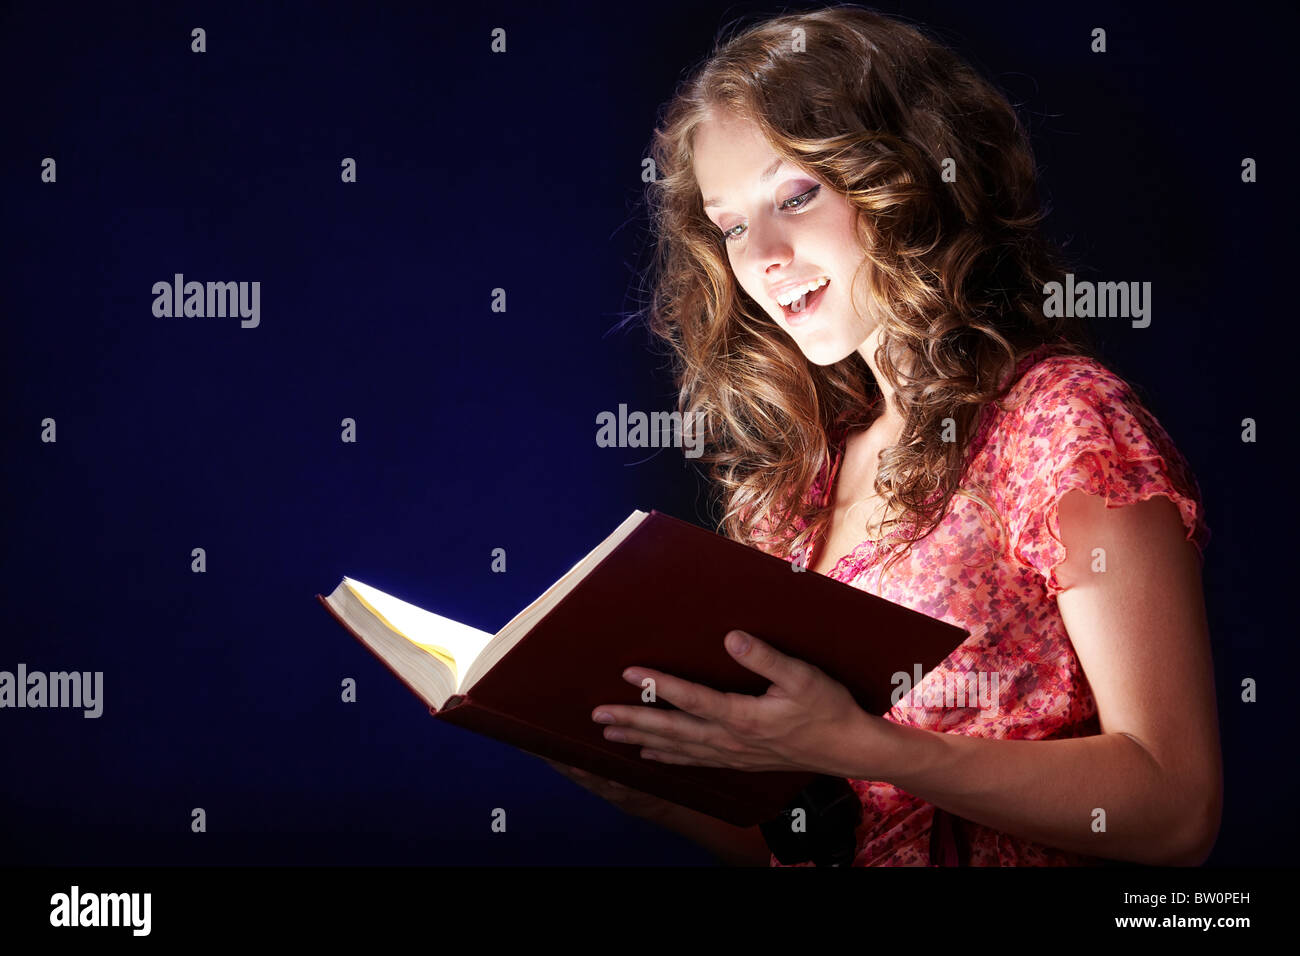 Love Potion Leaning On A Book Of Spells Stock Photo - Download